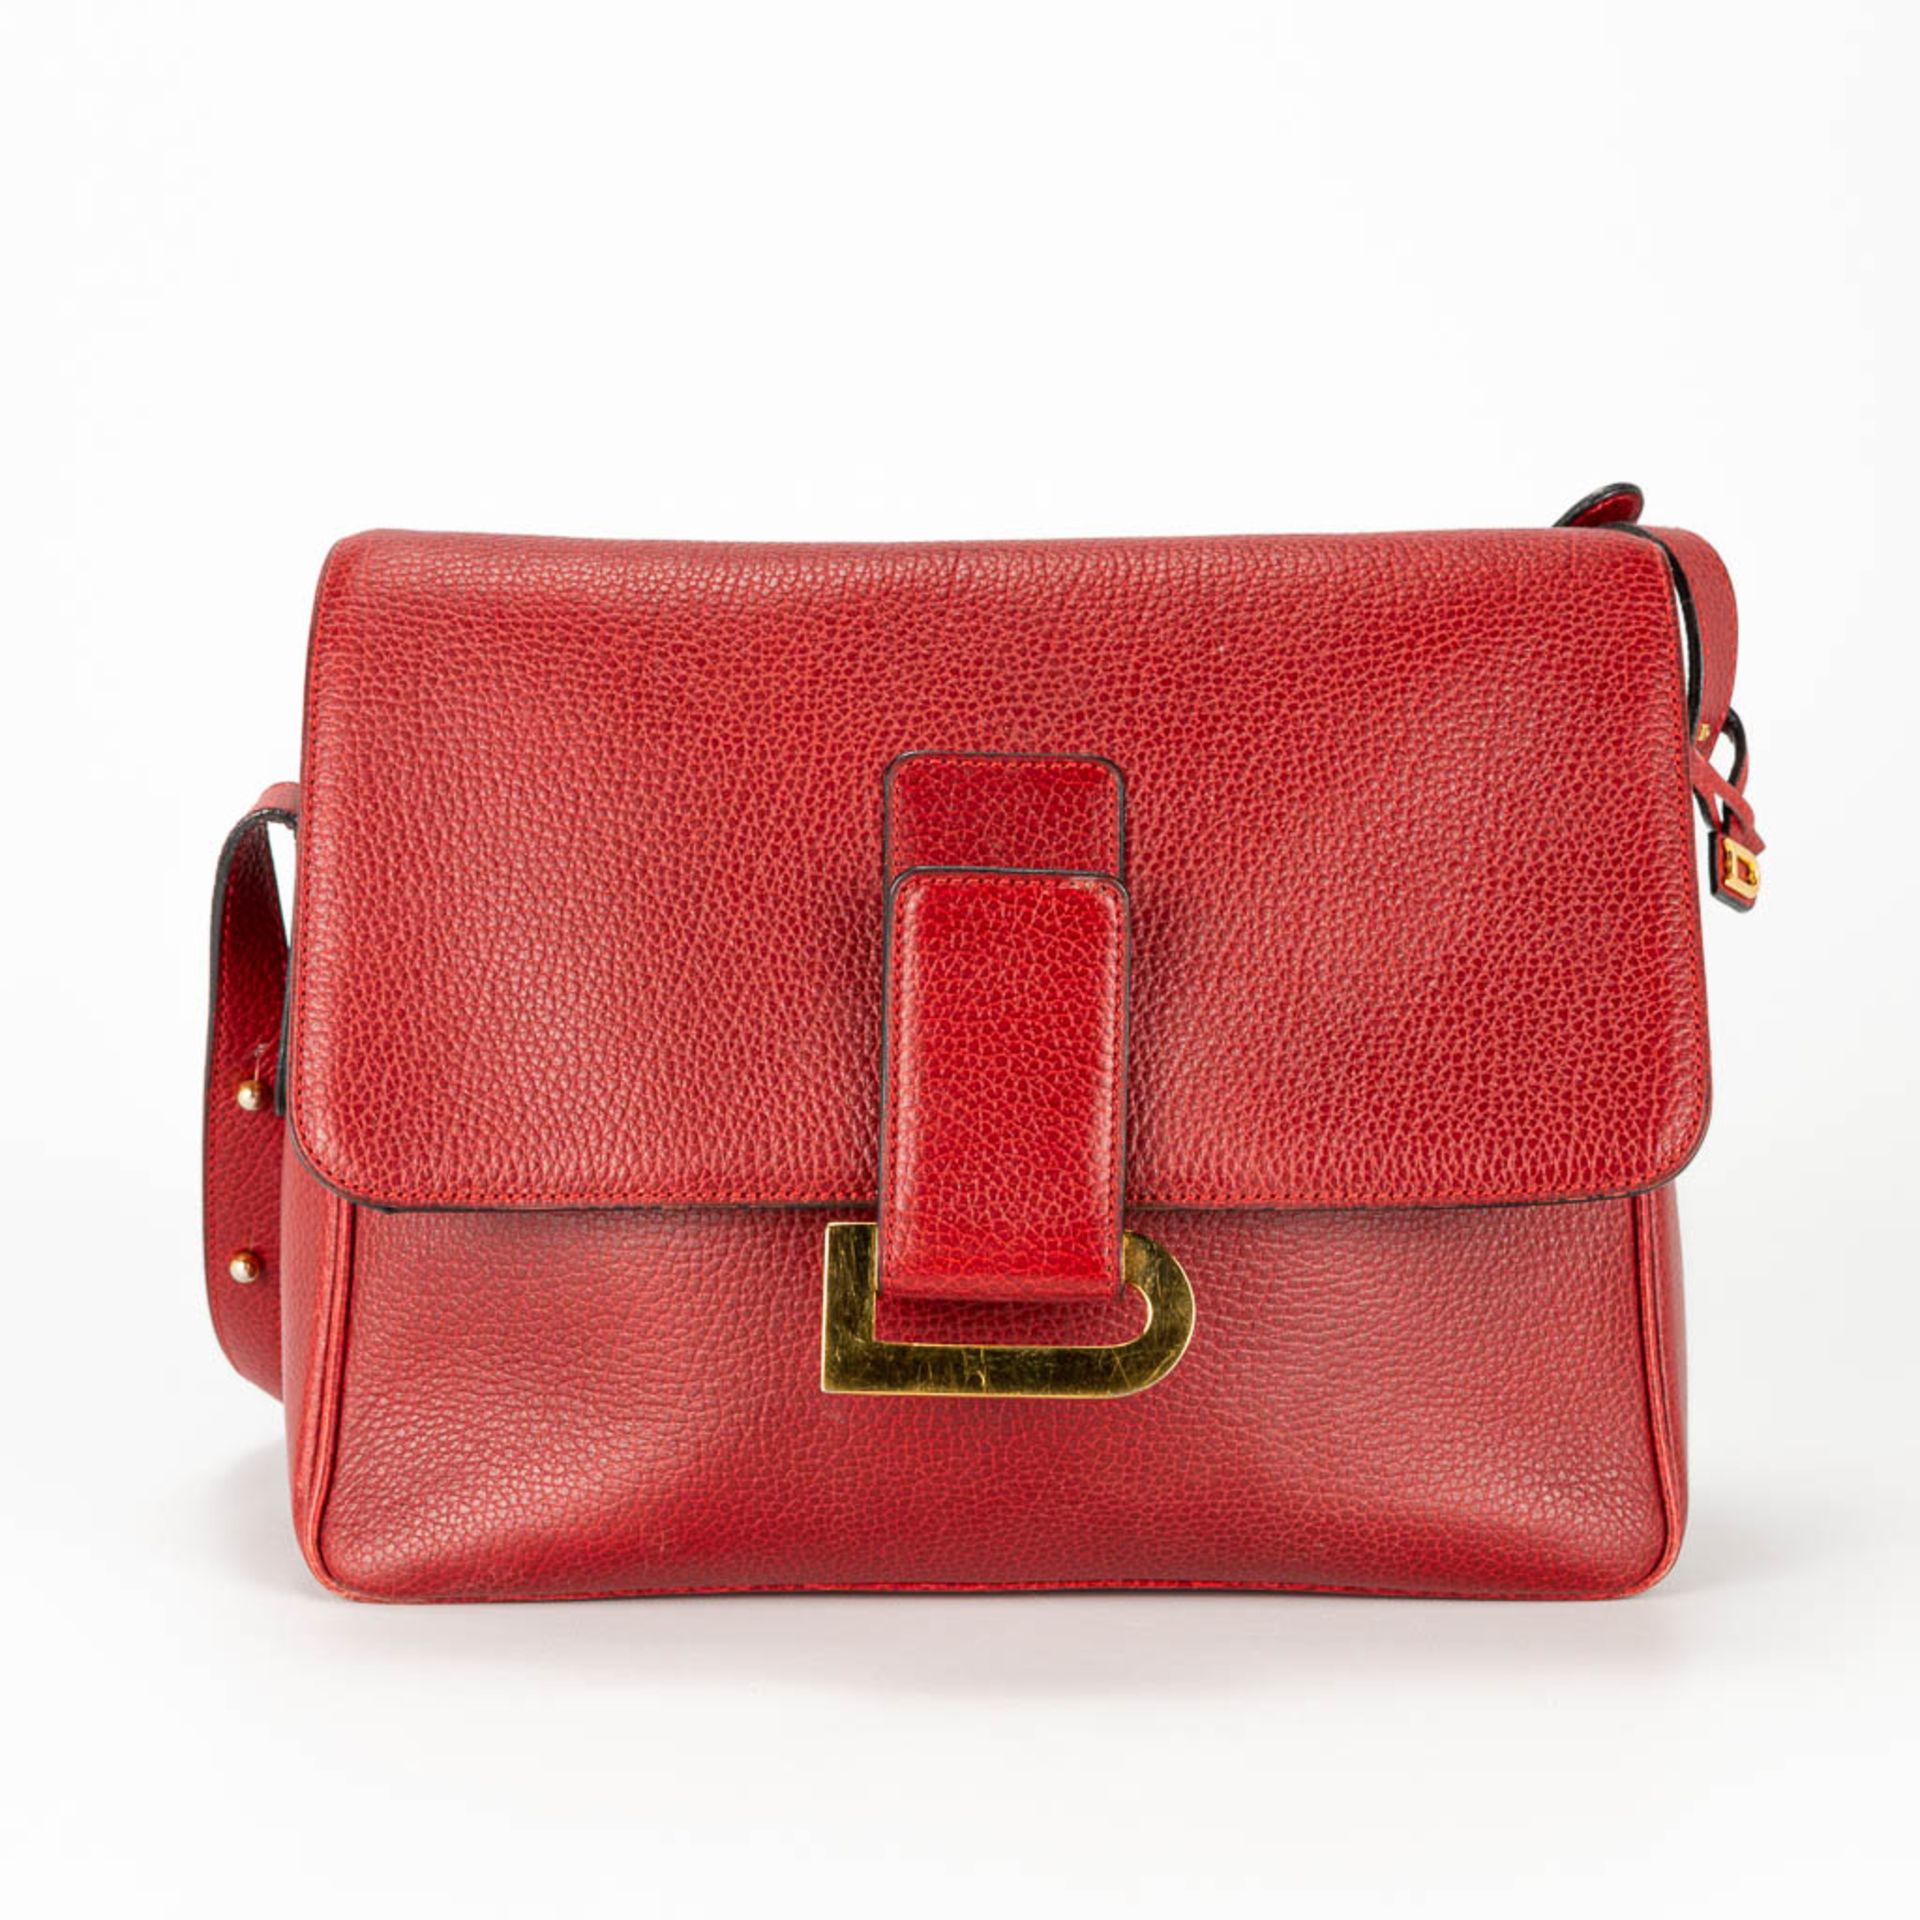 A purse made of red leather and marked Delvaux. - Image 3 of 16